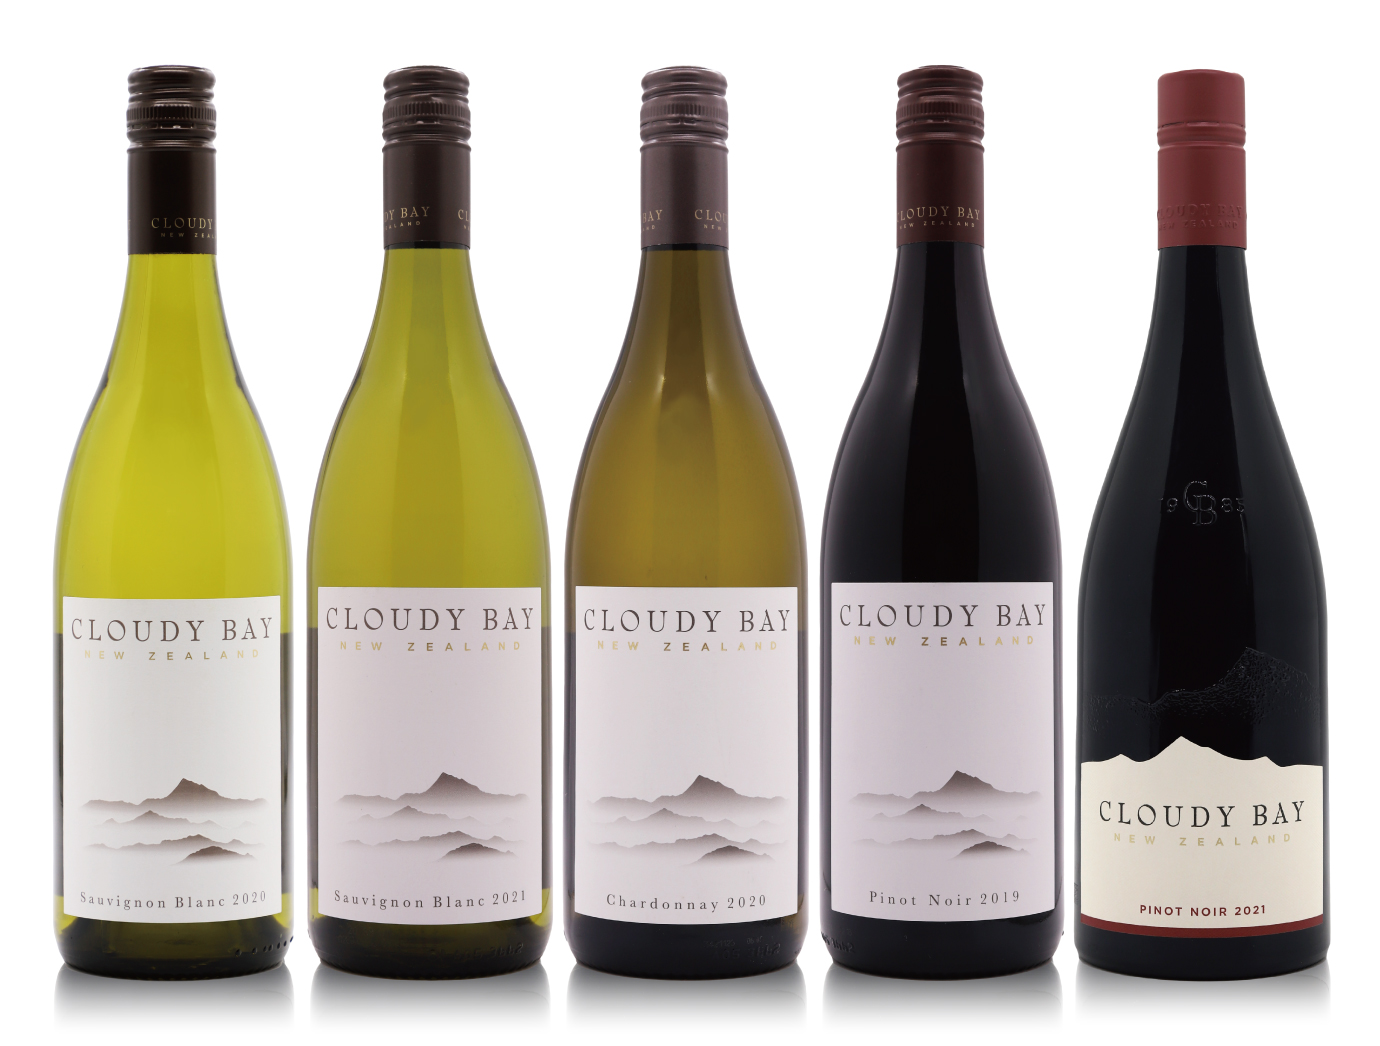 Cloudy Bay Pinot Noir - 2015 - 750ml – Wine's Link Limited